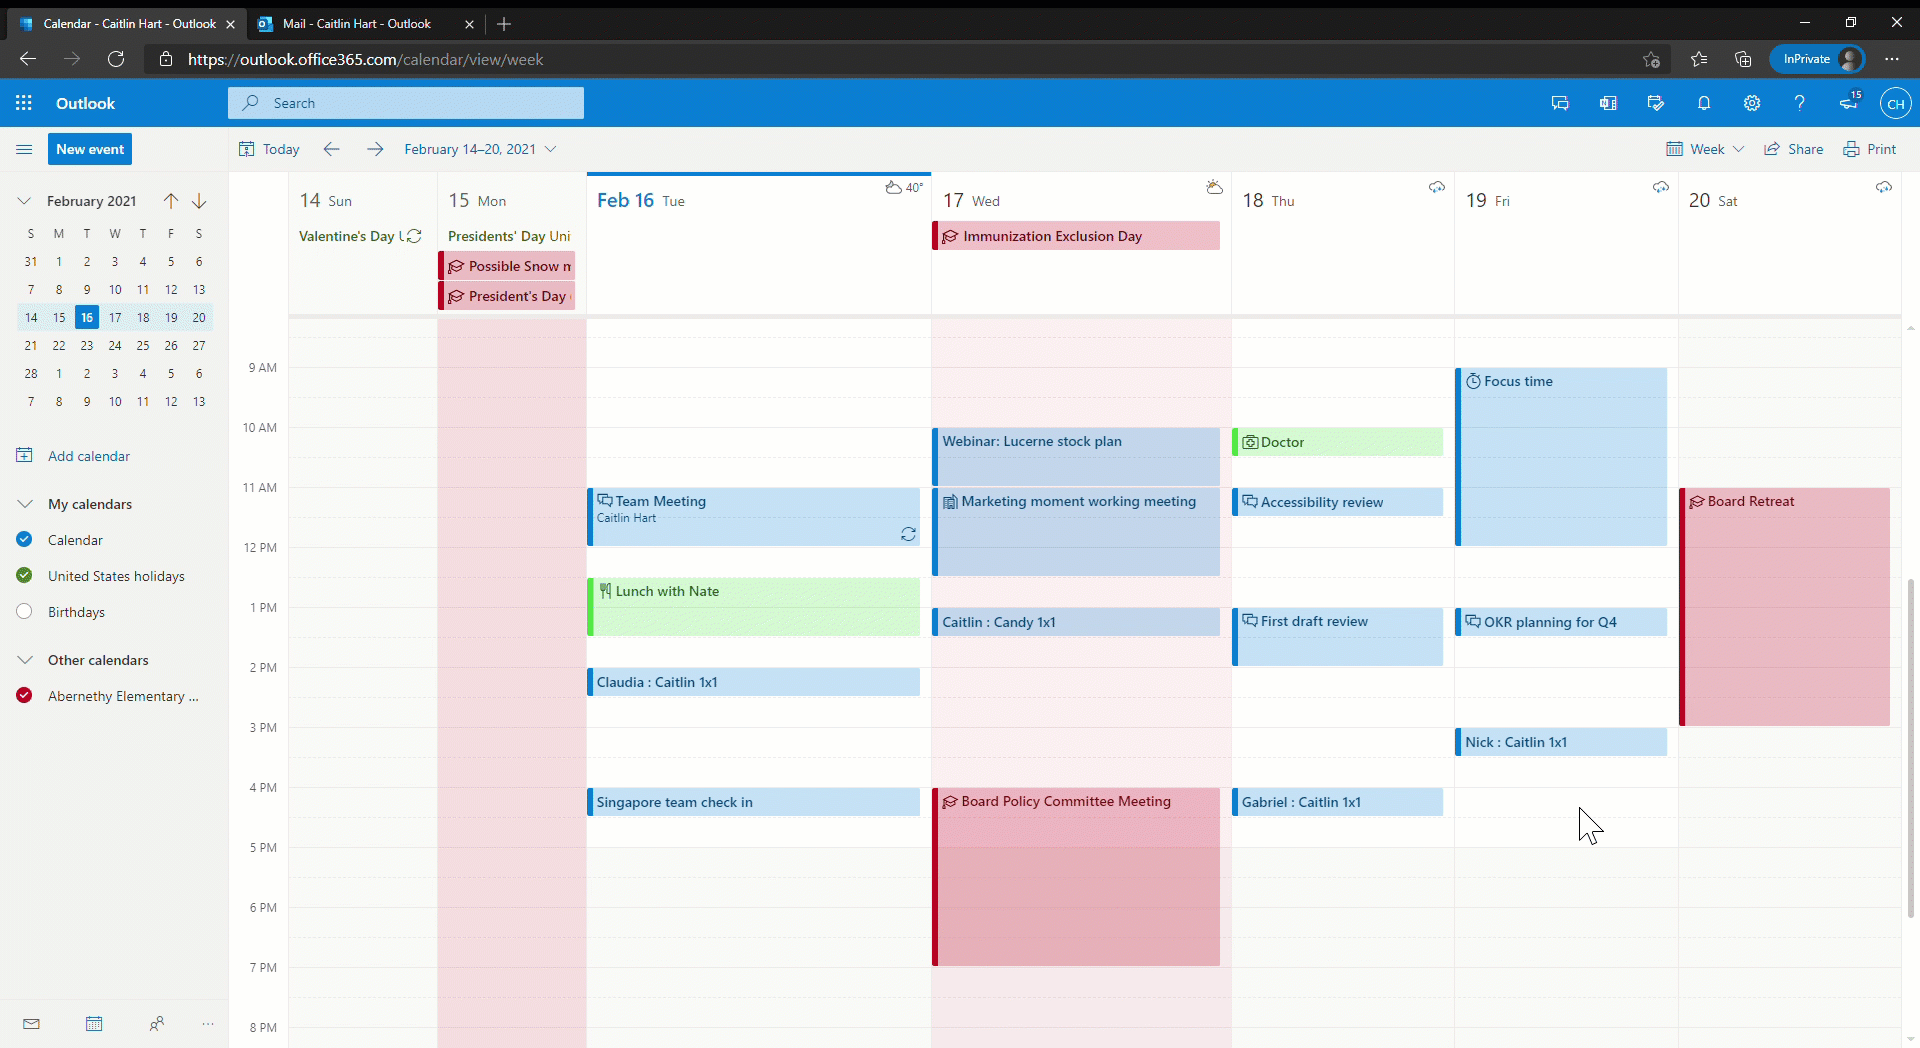 At Ignite Microsoft Introduced a New Outlook Calendar Look